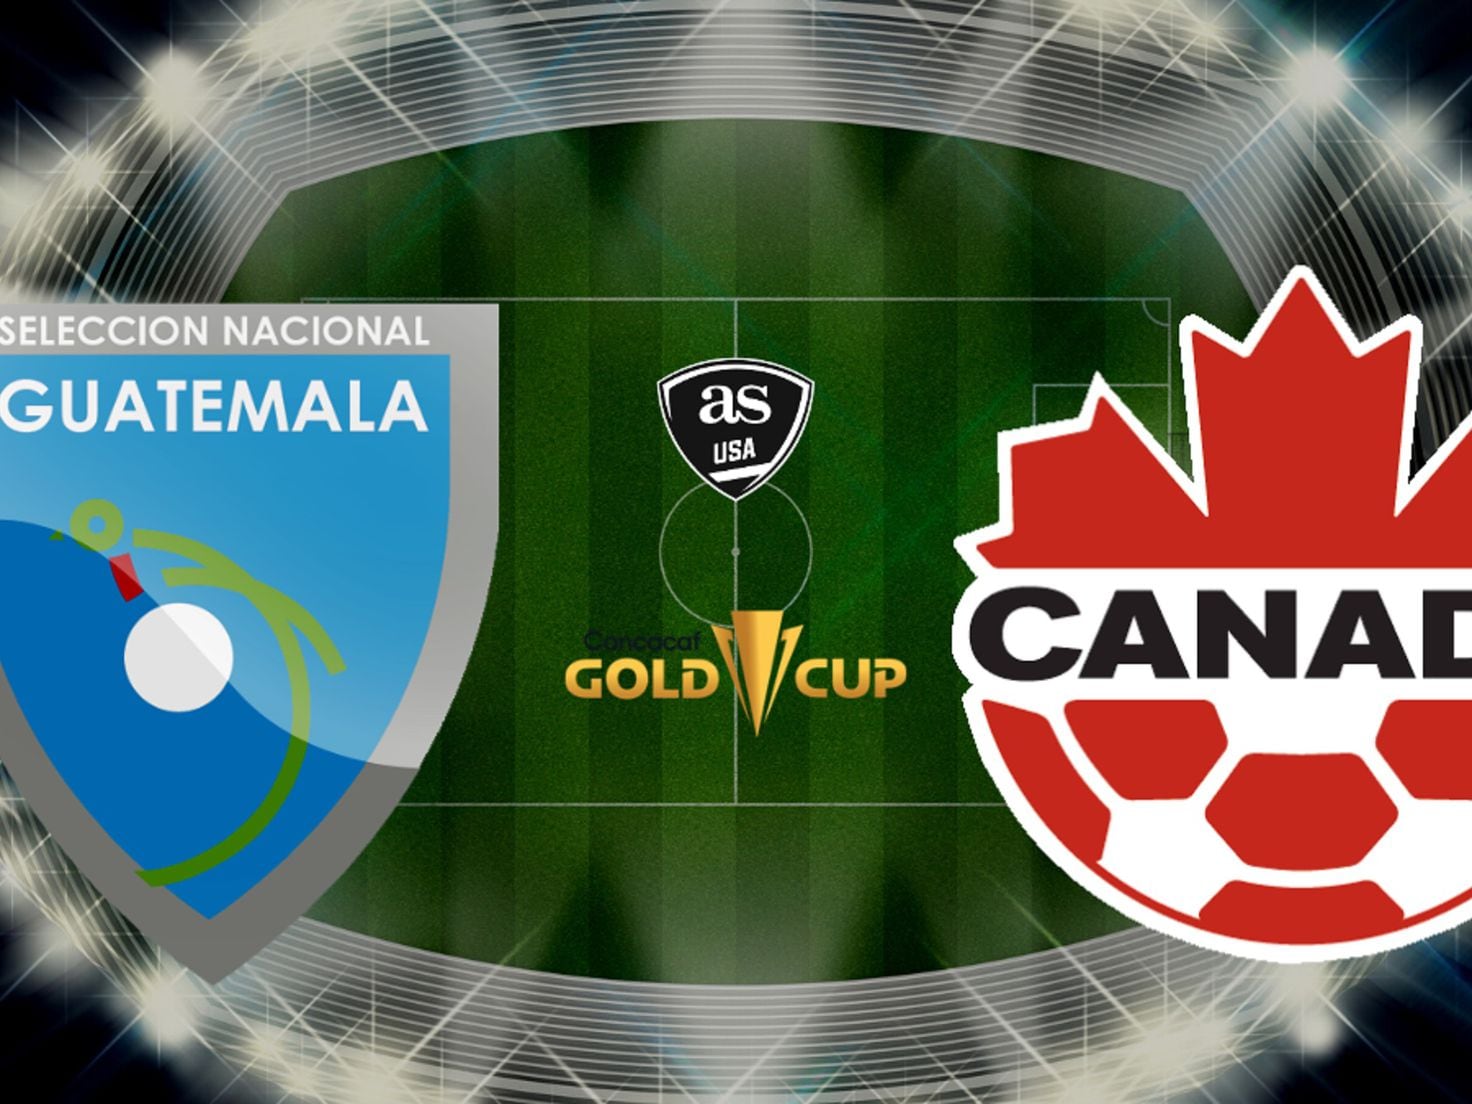 Highlights of Guatemala 0-0 Canada in the Gold Cup